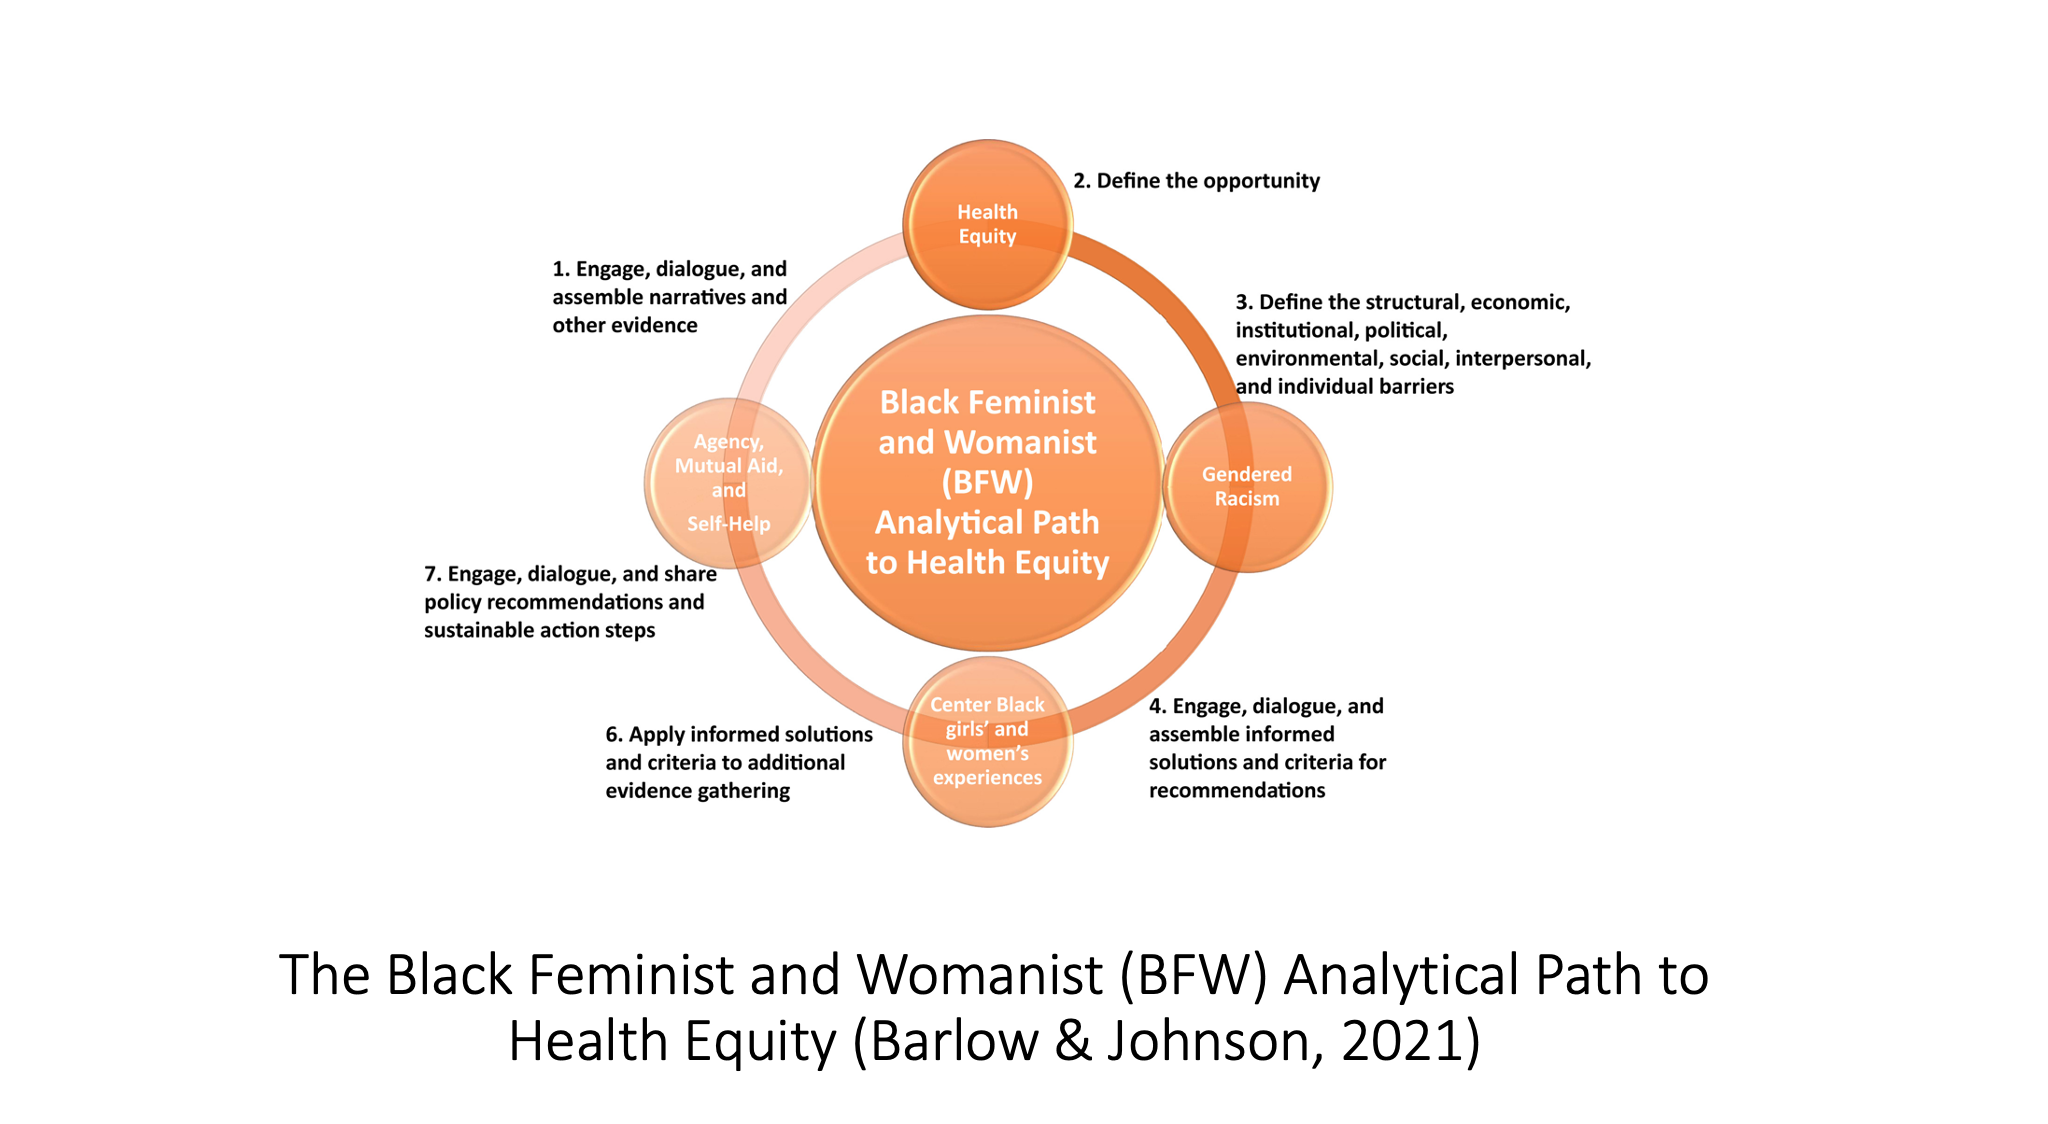 Schematic of The Black Feminist and Womanist Analytical Path to Health Equity